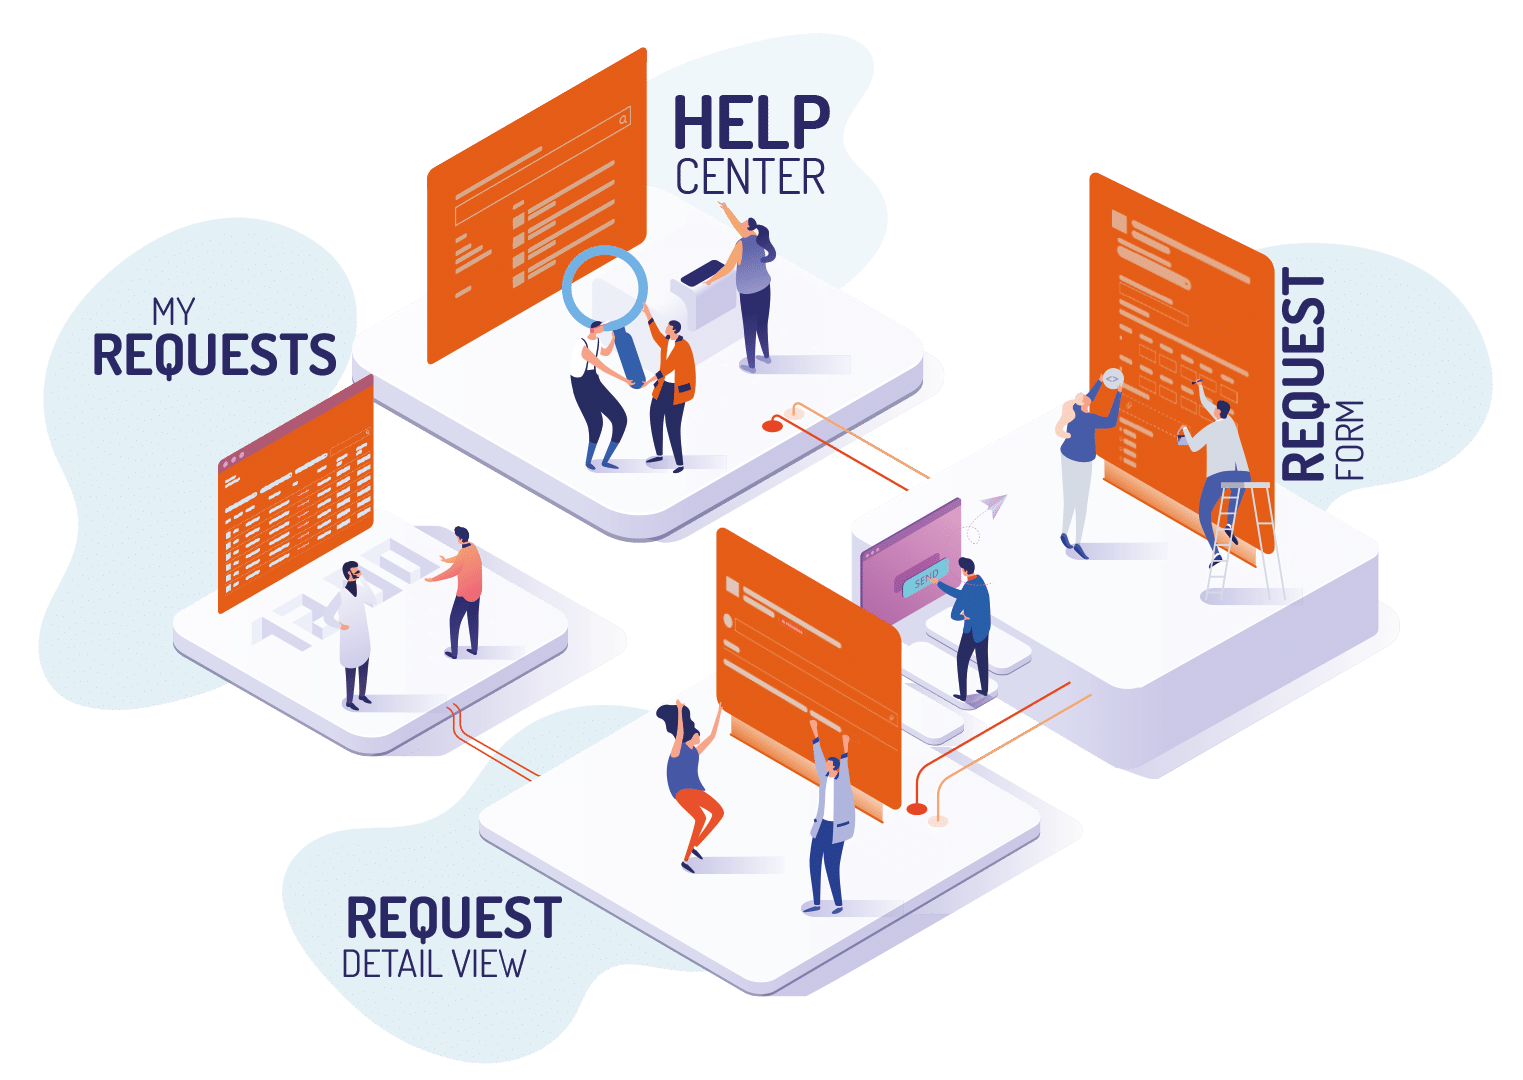 The four screens that a customer can see in Jira Service Management illustration. 1. help center 2. request form 3. request detail view 4. my requests